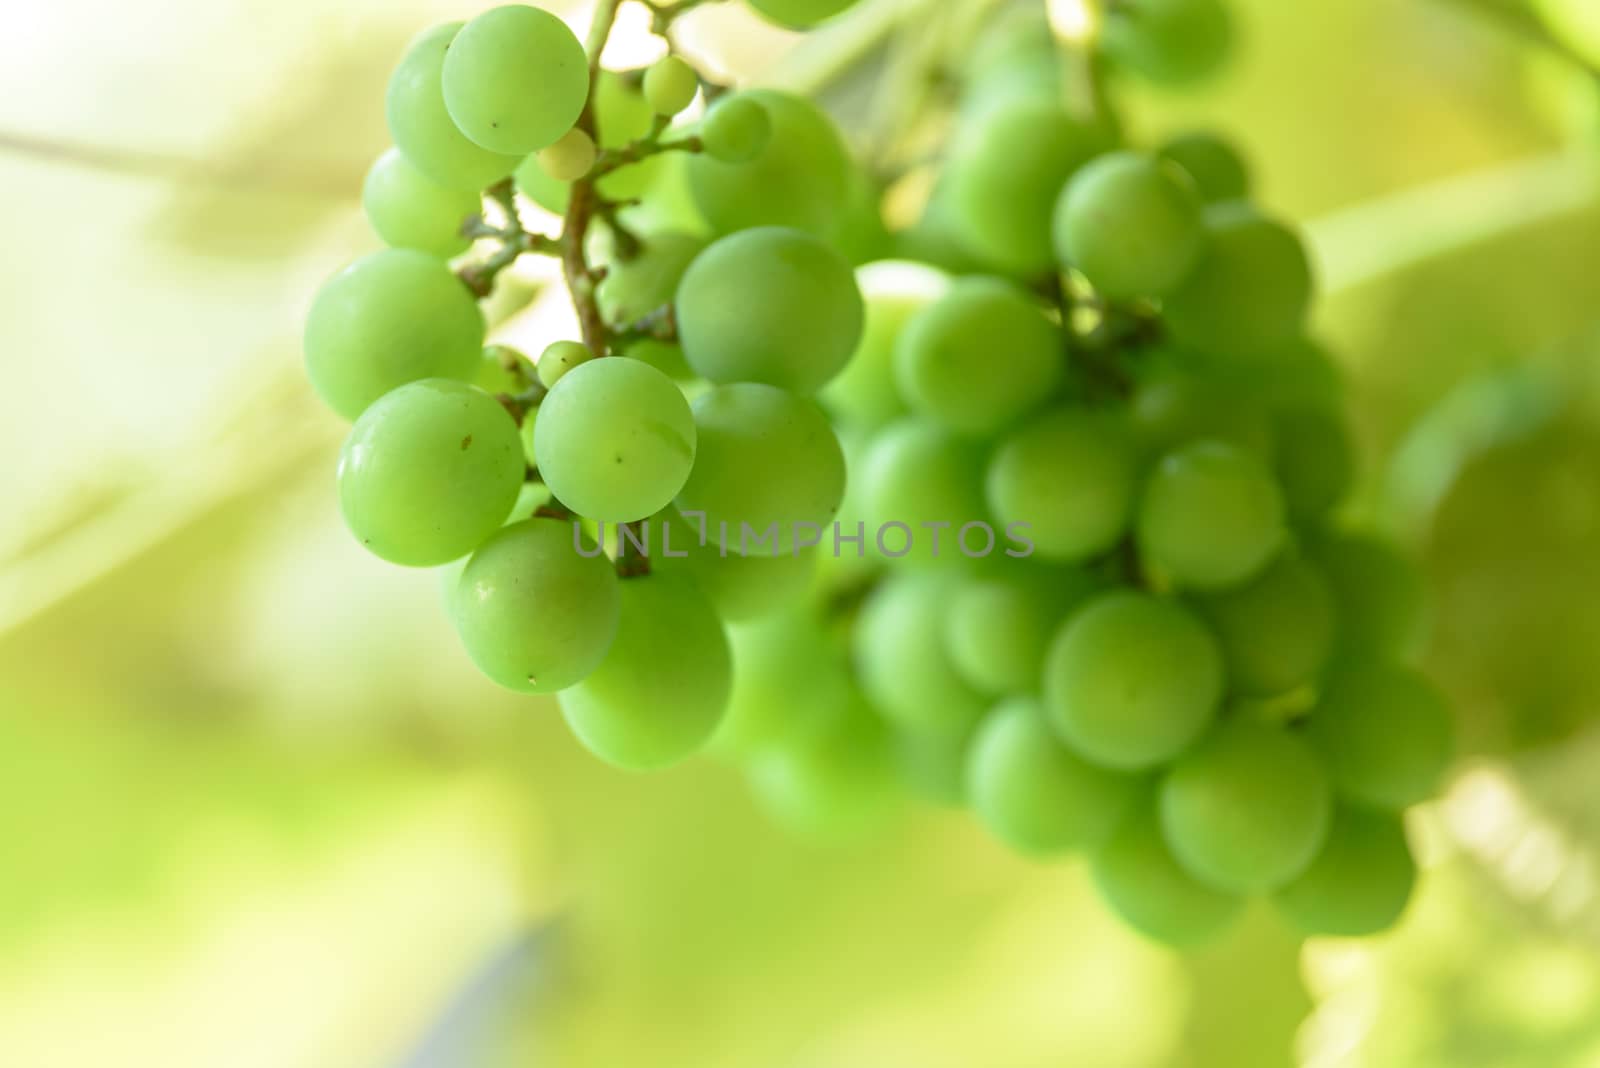 Juicy bunches of green grapes on the bushes in the sun